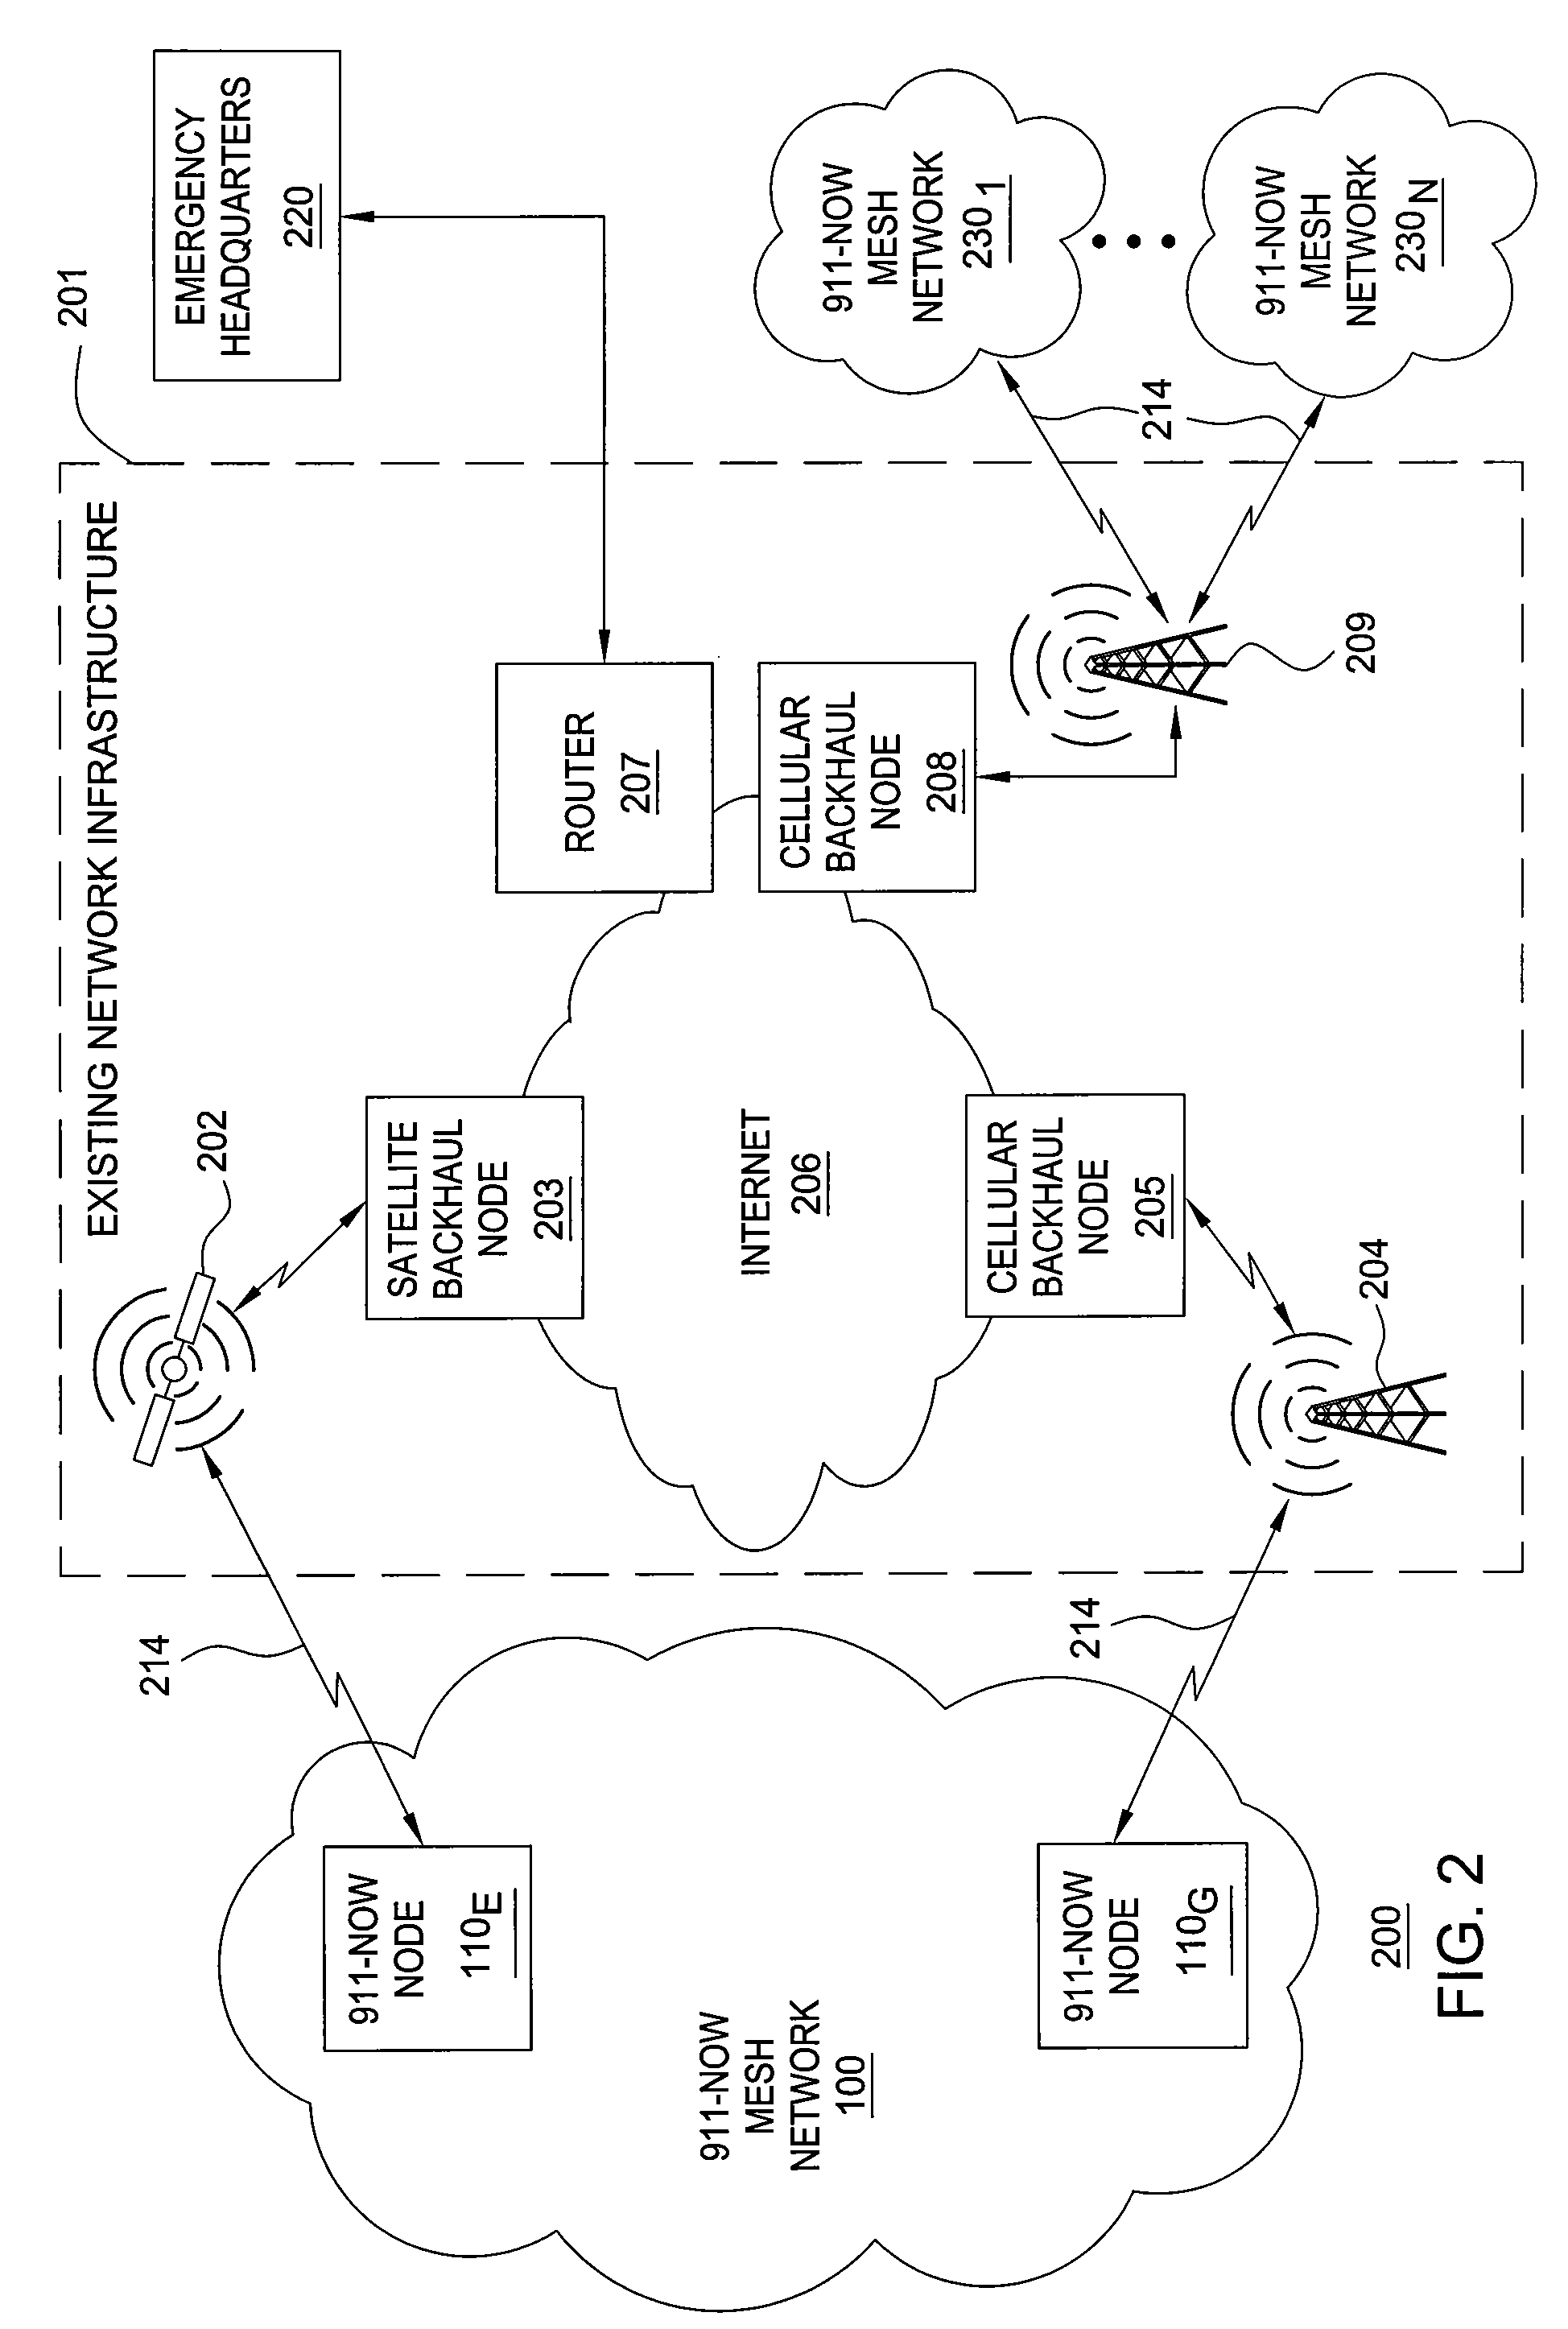 Method and Apparatus for Authenticating Nodes in a Wireless Network